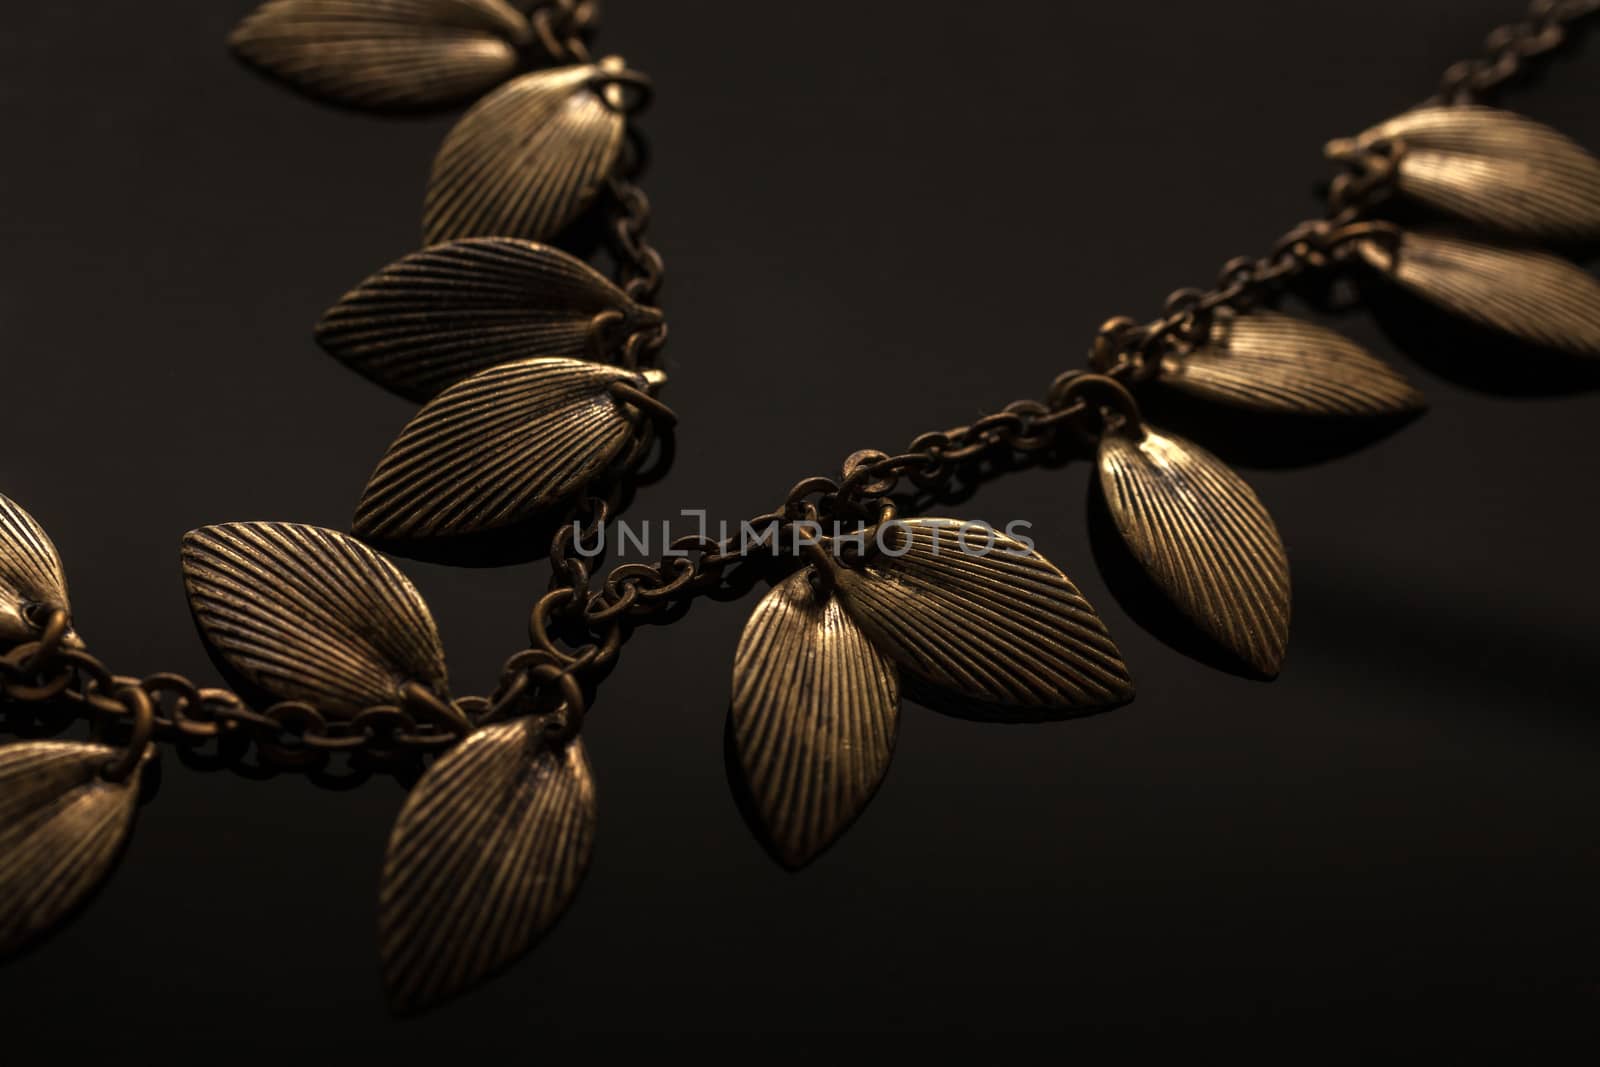 Golden chain necklace with leaves on blackground